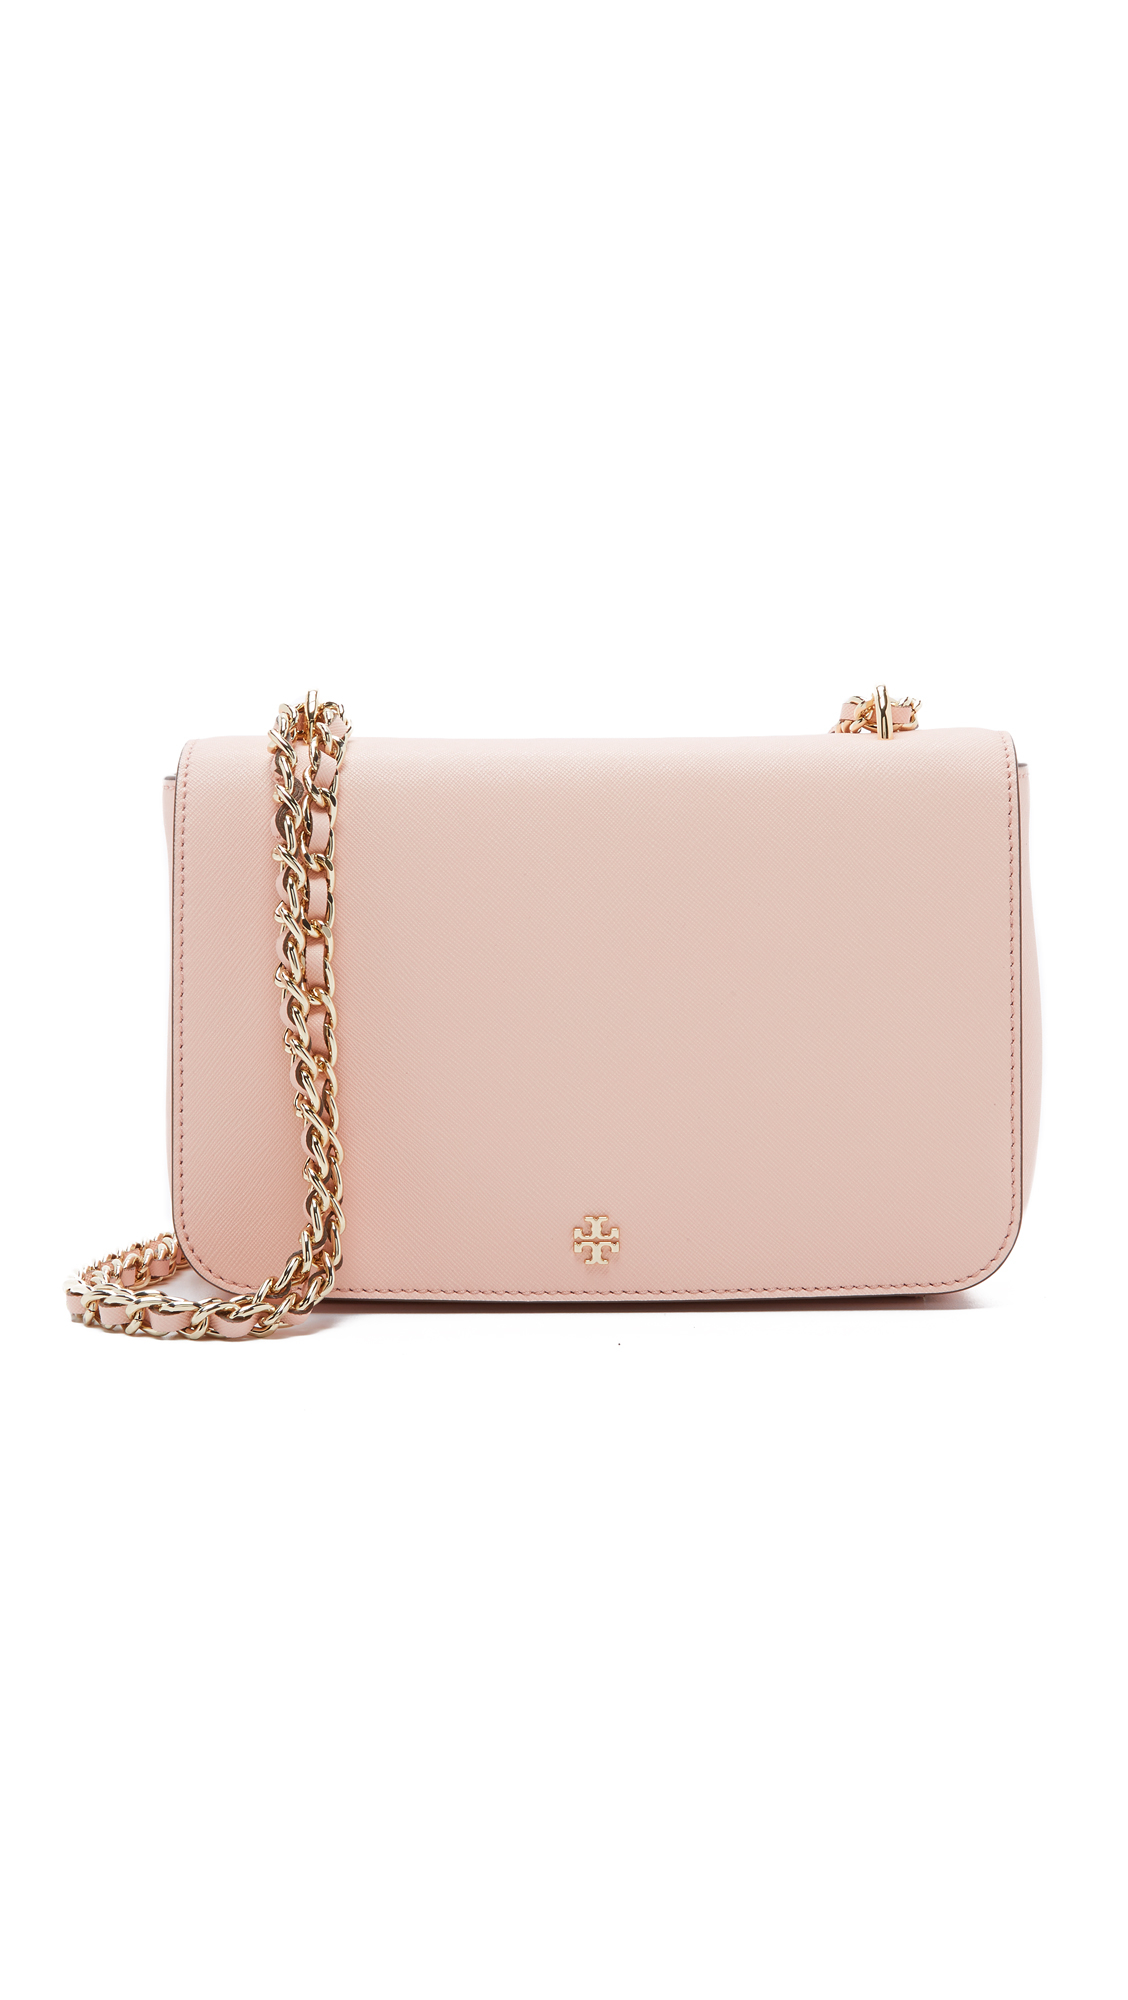 Light Pink Tory Burch Crossbody Outlet, SAVE 50% 